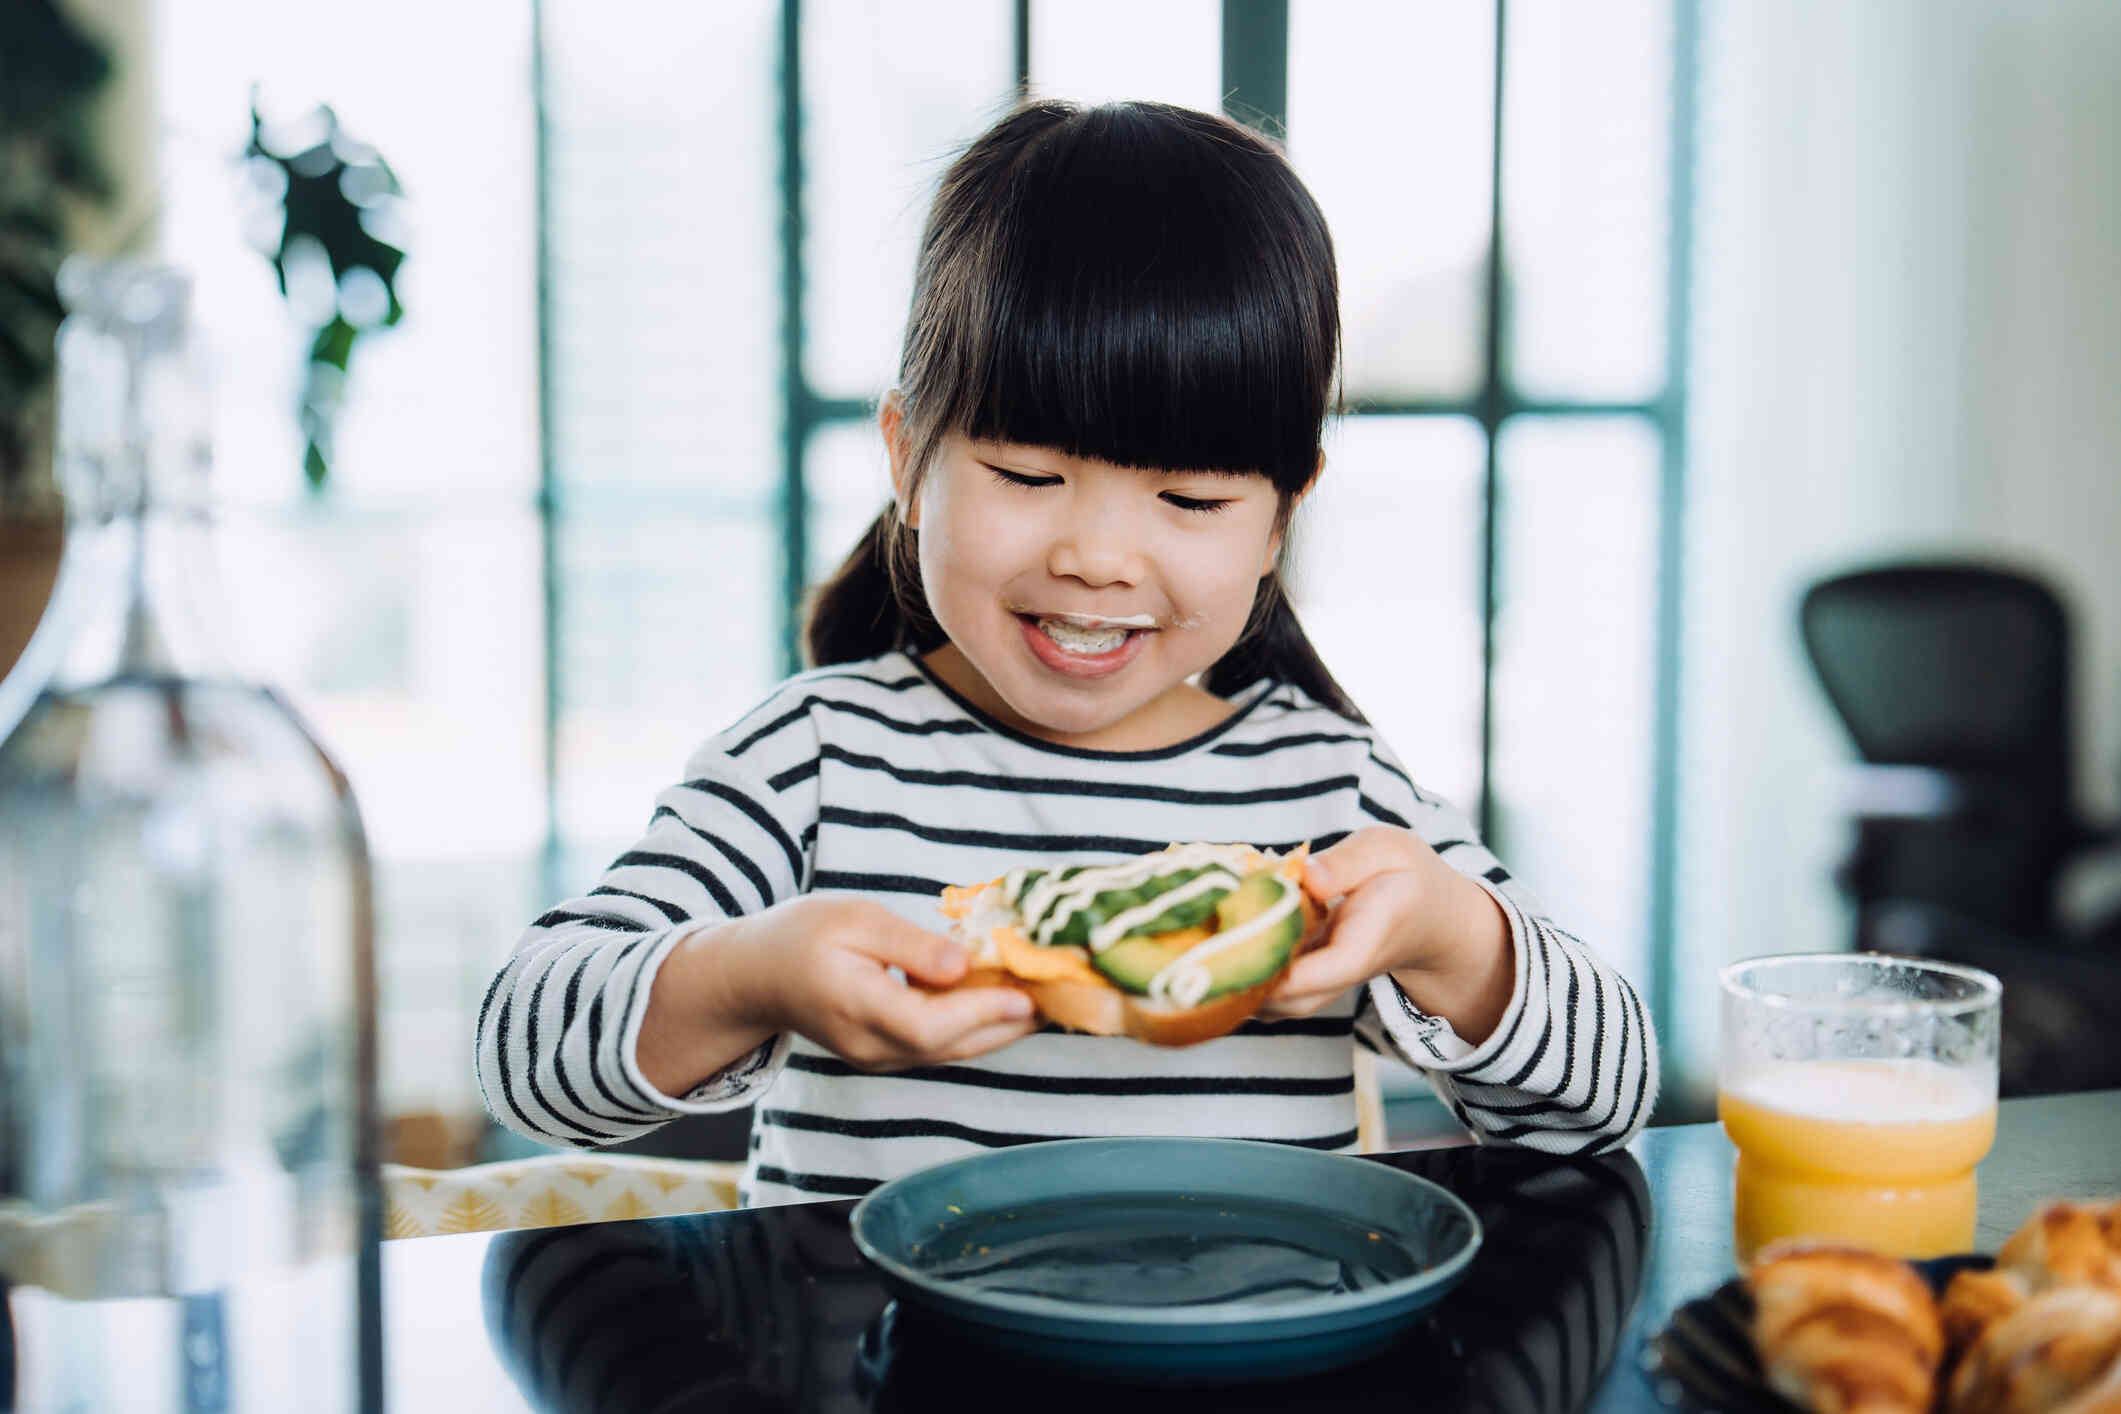 A little girl sits at the kitchen table and eats on open face sandwhich while smiling.